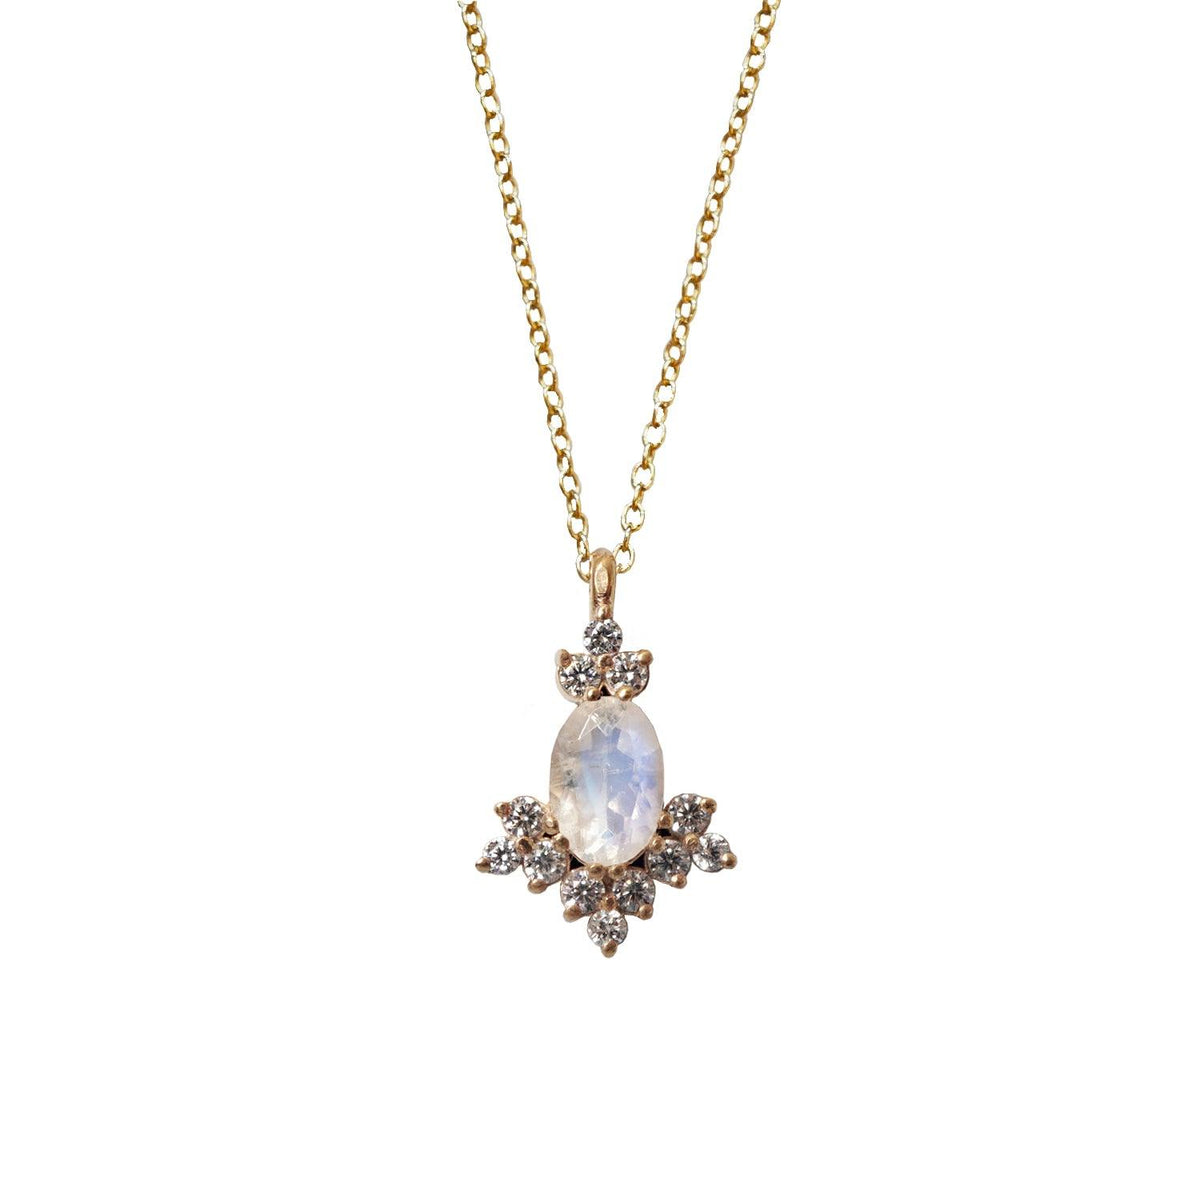 Moonstone Shimmer Necklace - Tippy Taste Jewelry